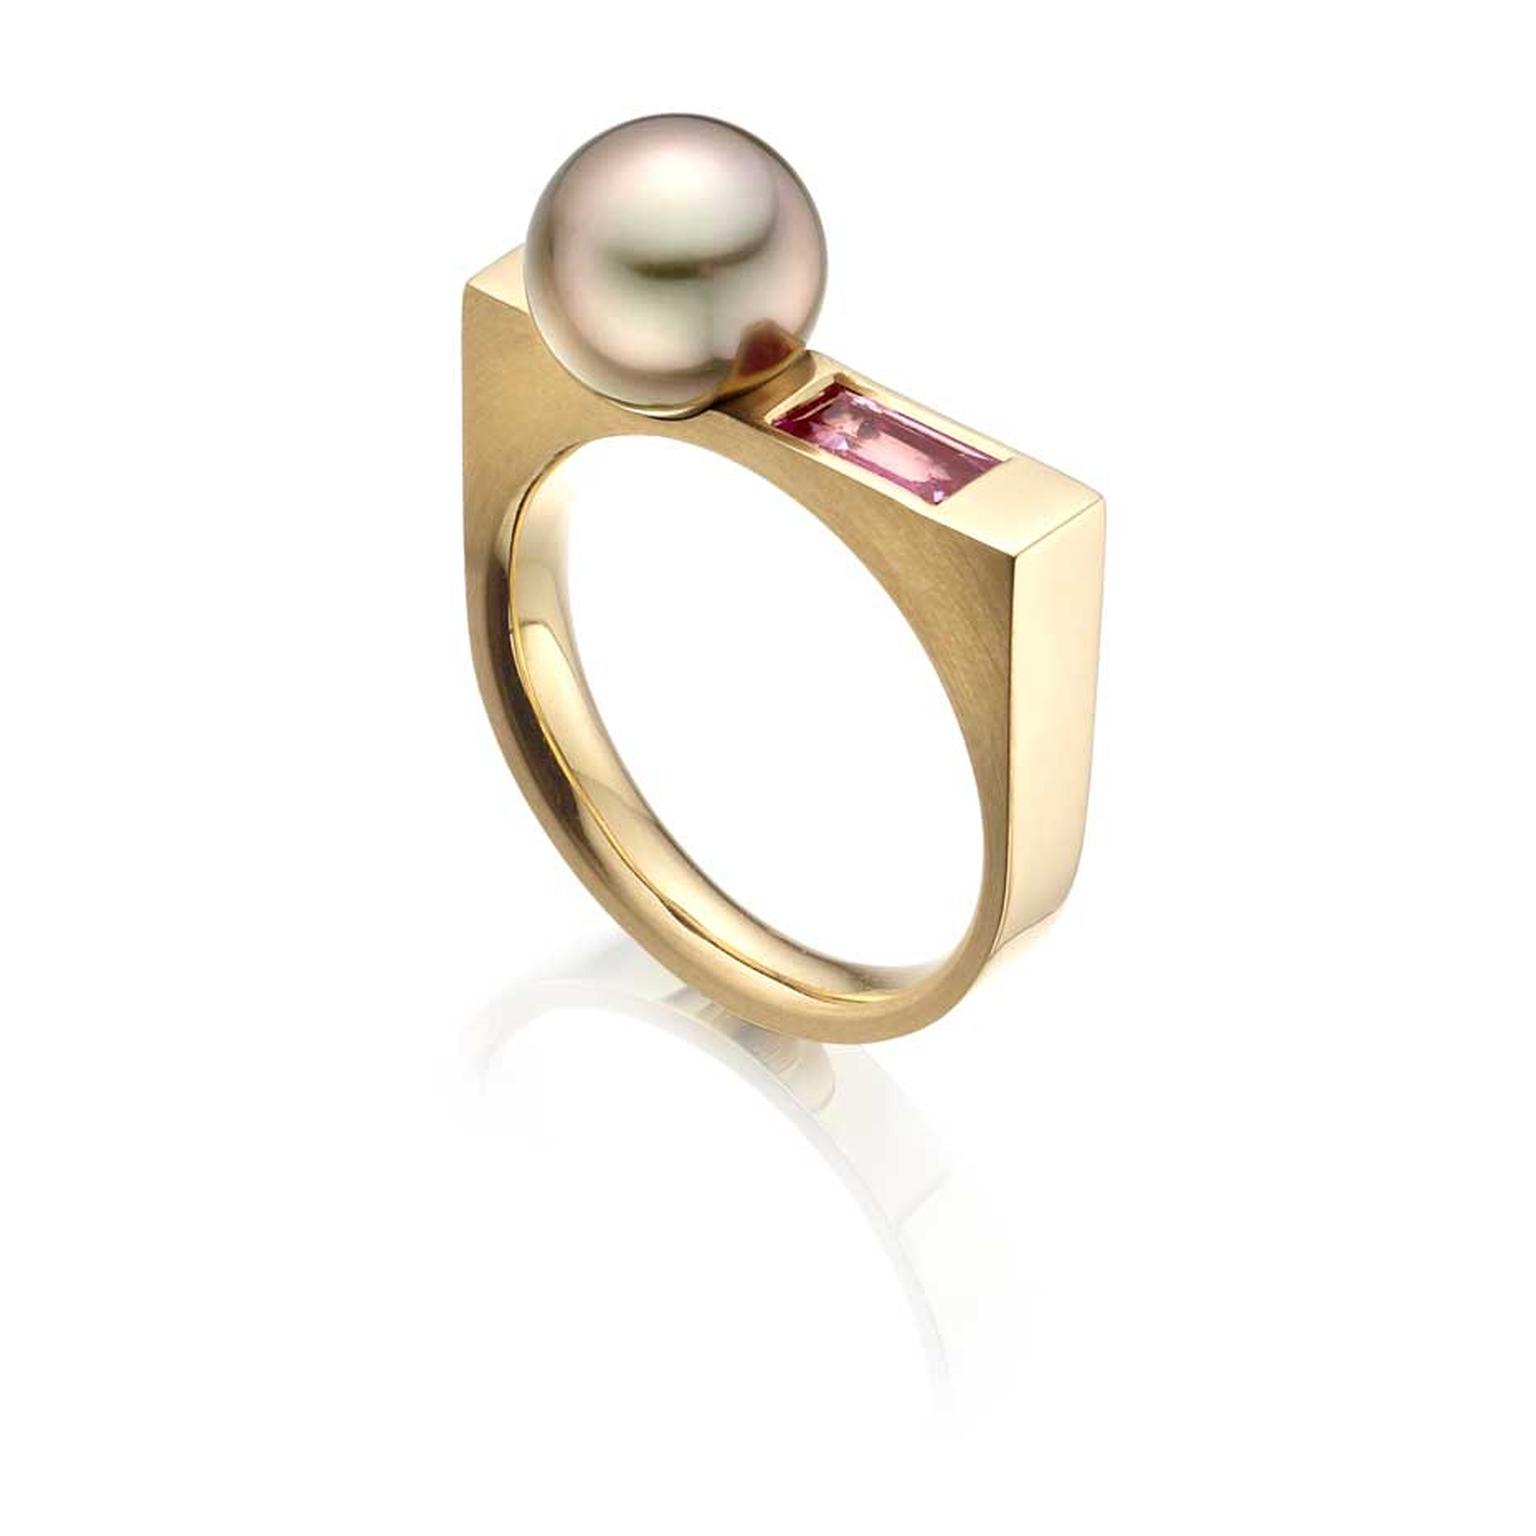 Winterson Luna Rose aubergine Tahitian Pearl Ring with pink sapphire in yellow gold.